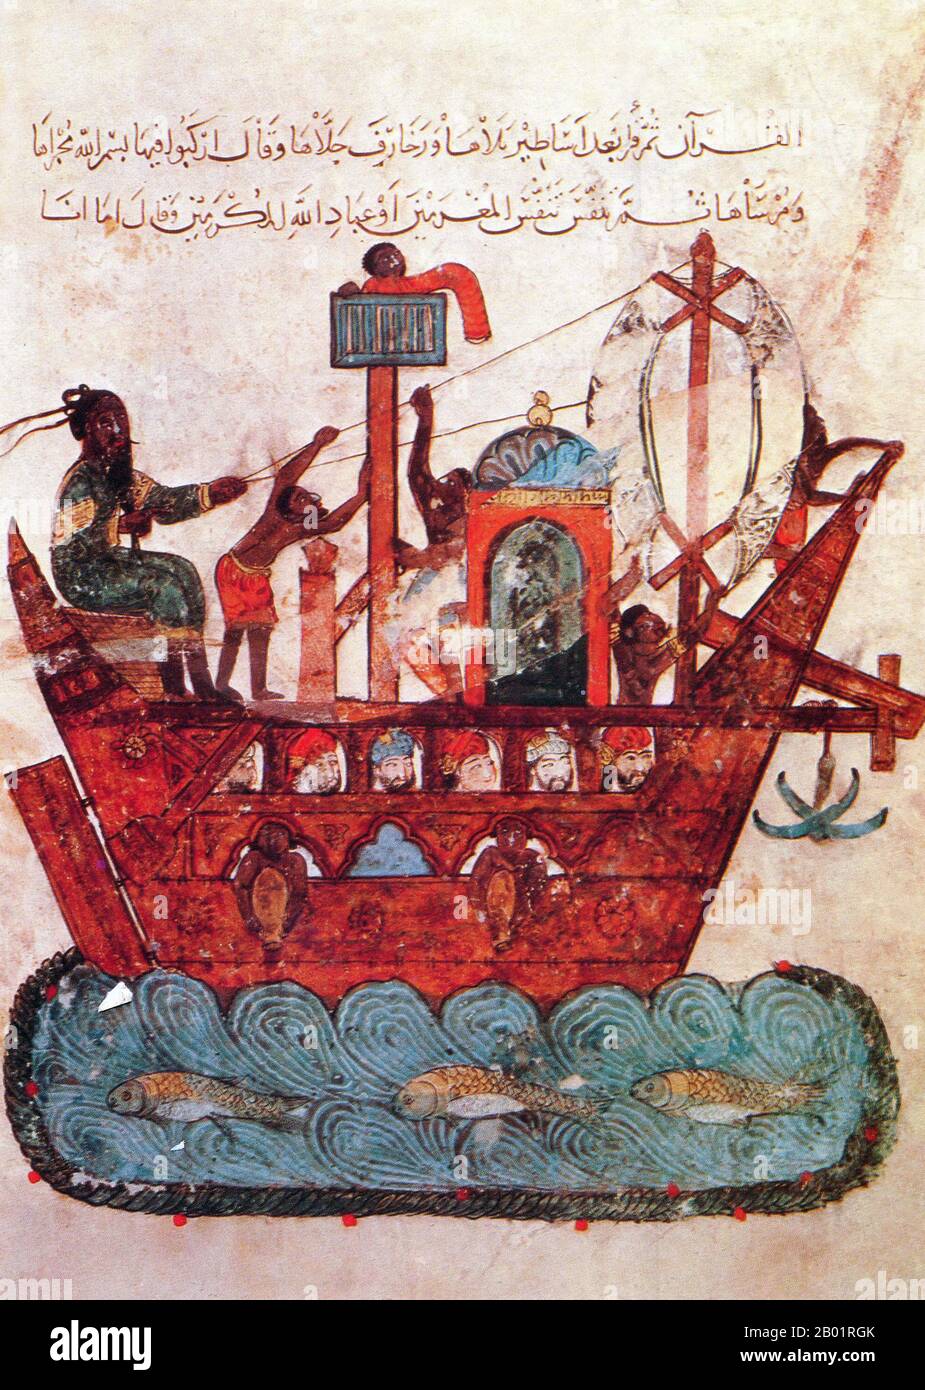 Iraq: Mariners aboard a dhow, probably from the Swahili Coast. Miniature painting by Yahya ibn Mahmud al-Wasiti, 1237 CE.  Yahyâ ibn Mahmûd al-Wâsitî was a 13th-century Arab Islamic artist. Al-Wasiti was born in Wasit in southern Iraq. He was noted for his illustrations of the Maqam of al-Hariri.  Maqāma (literally 'assemblies') are an (originally) Arabic literary genre of rhymed prose with intervals of poetry in which rhetorical extravagance is conspicuous. The 10th century author Badī' al-Zaman al-Hamadhāni is said to have invented the form, which was extended by al-Hariri of Basra. Stock Photo